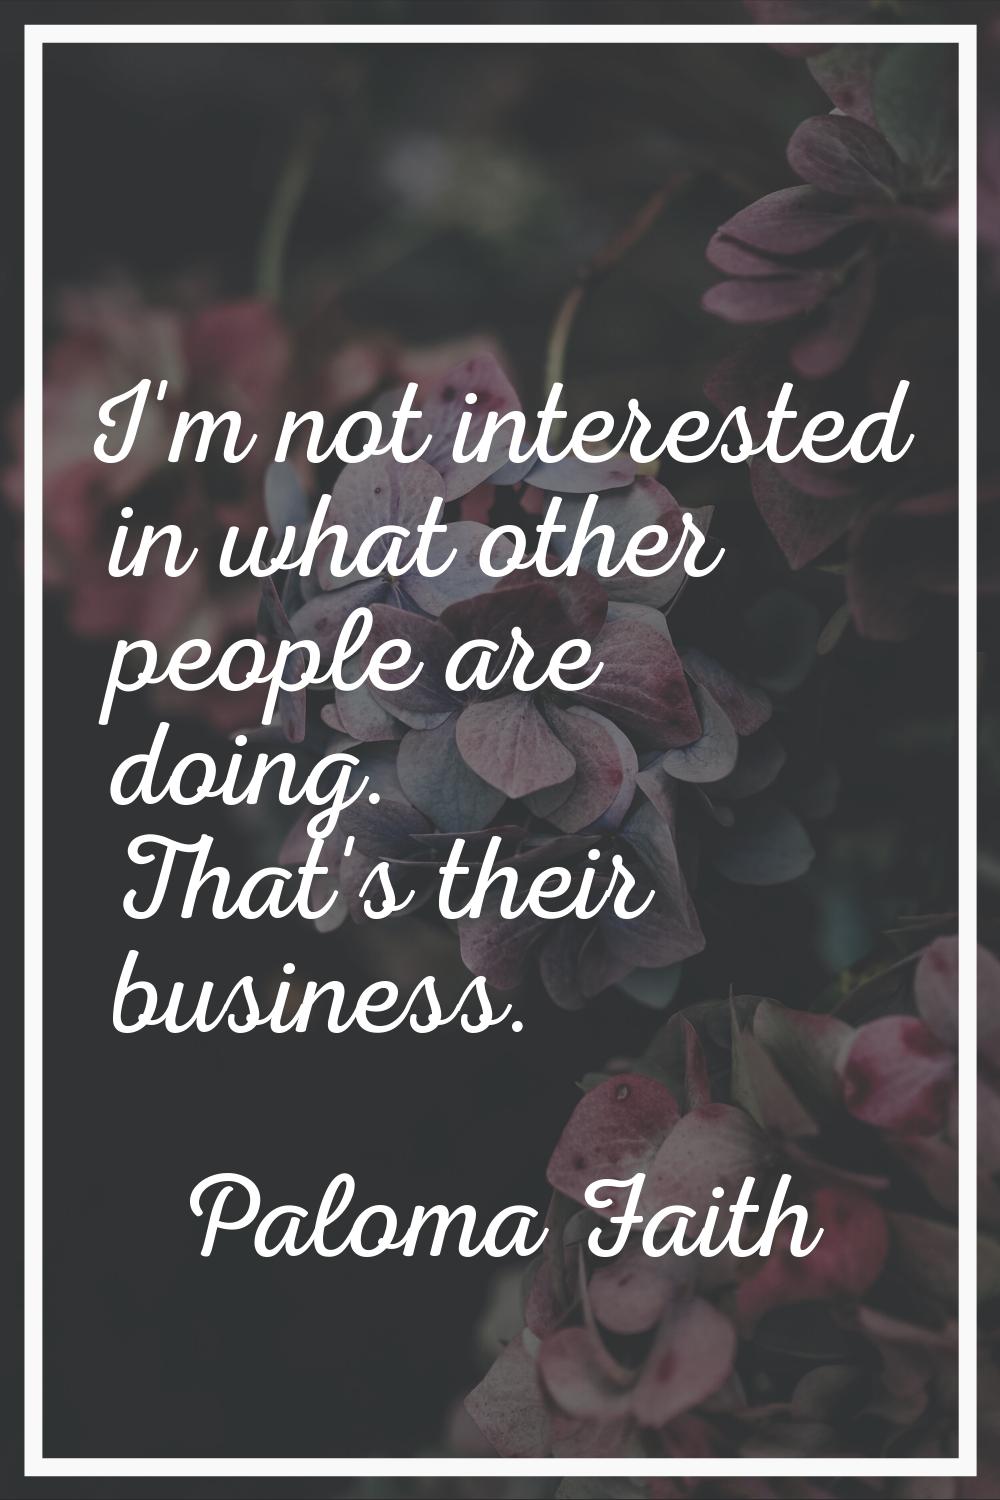 I'm not interested in what other people are doing. That's their business.